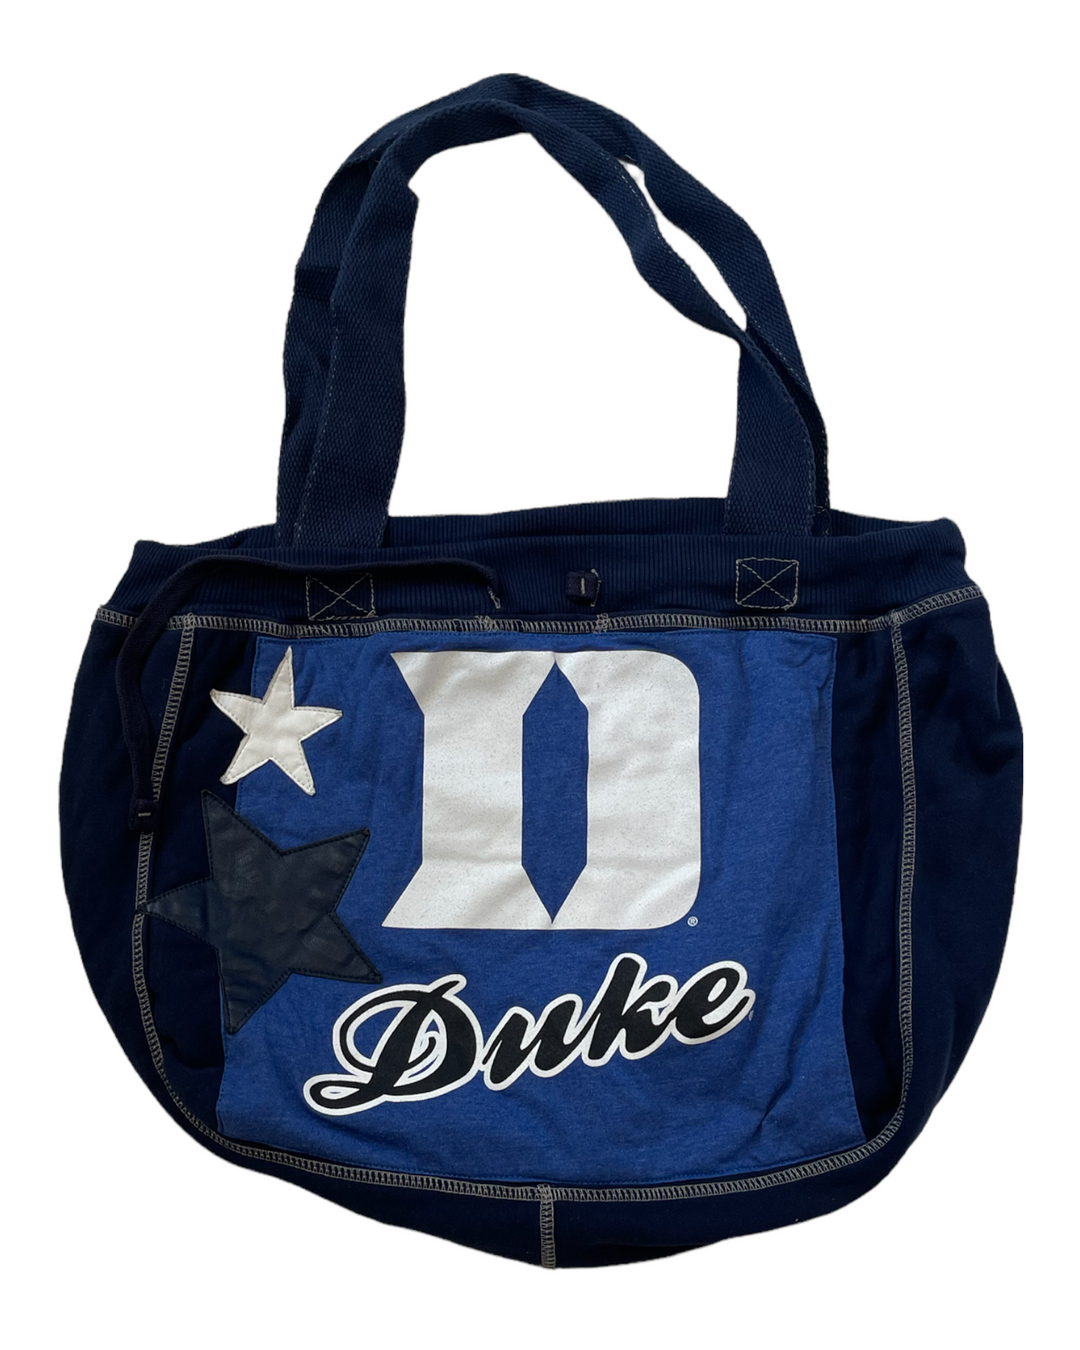 Patched Up Duke Tote